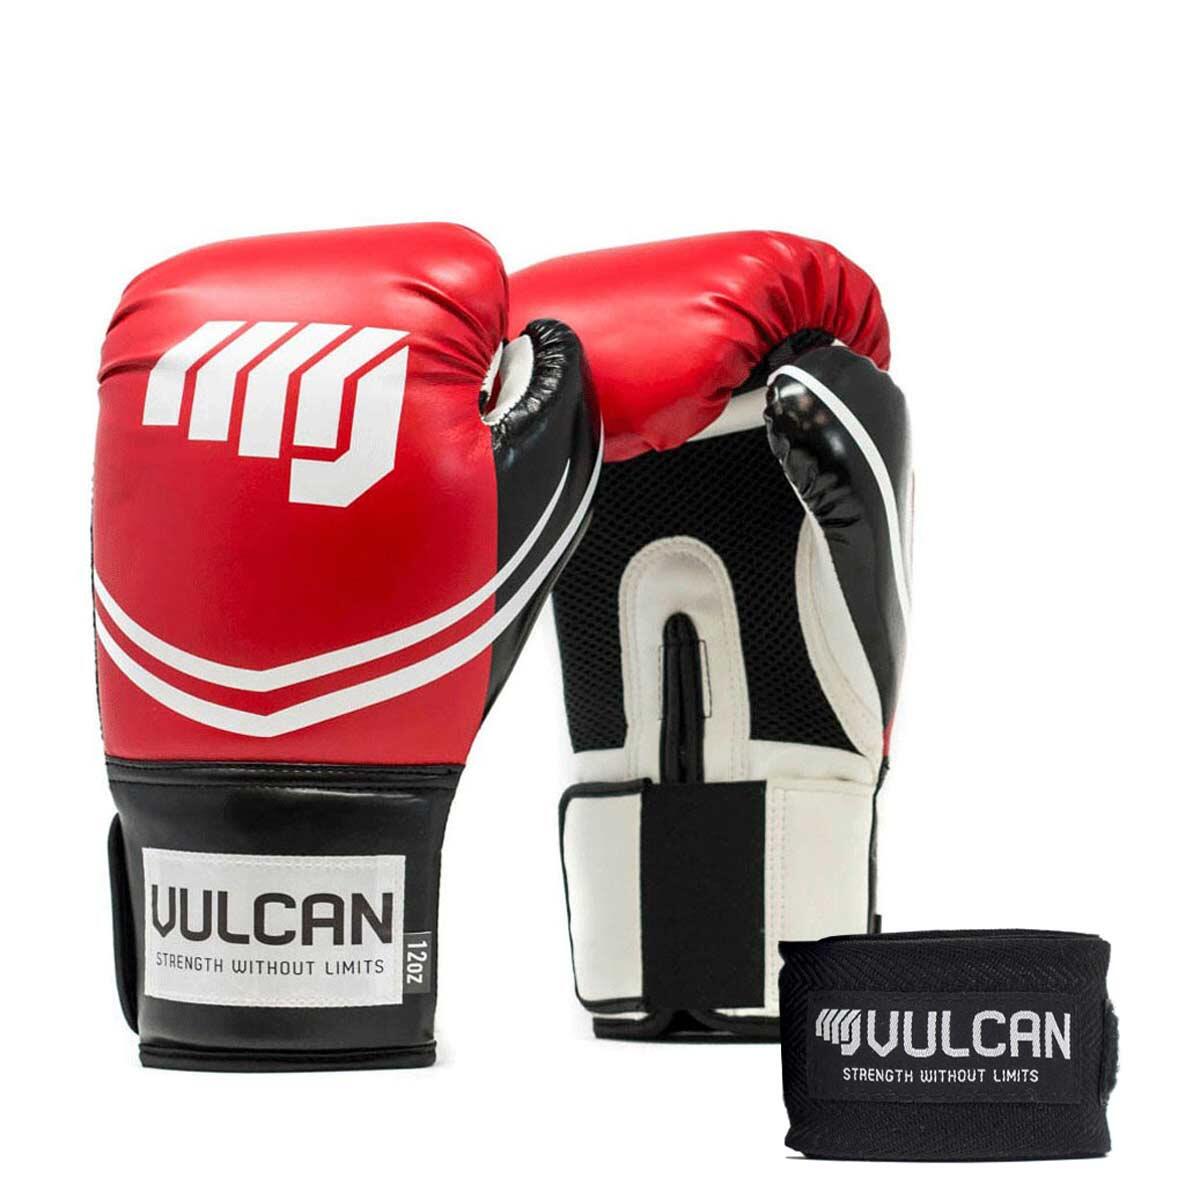 VULCAN BOXING GLOVES 12oz RED/BLACK WITH HANDWRAPS 1/7